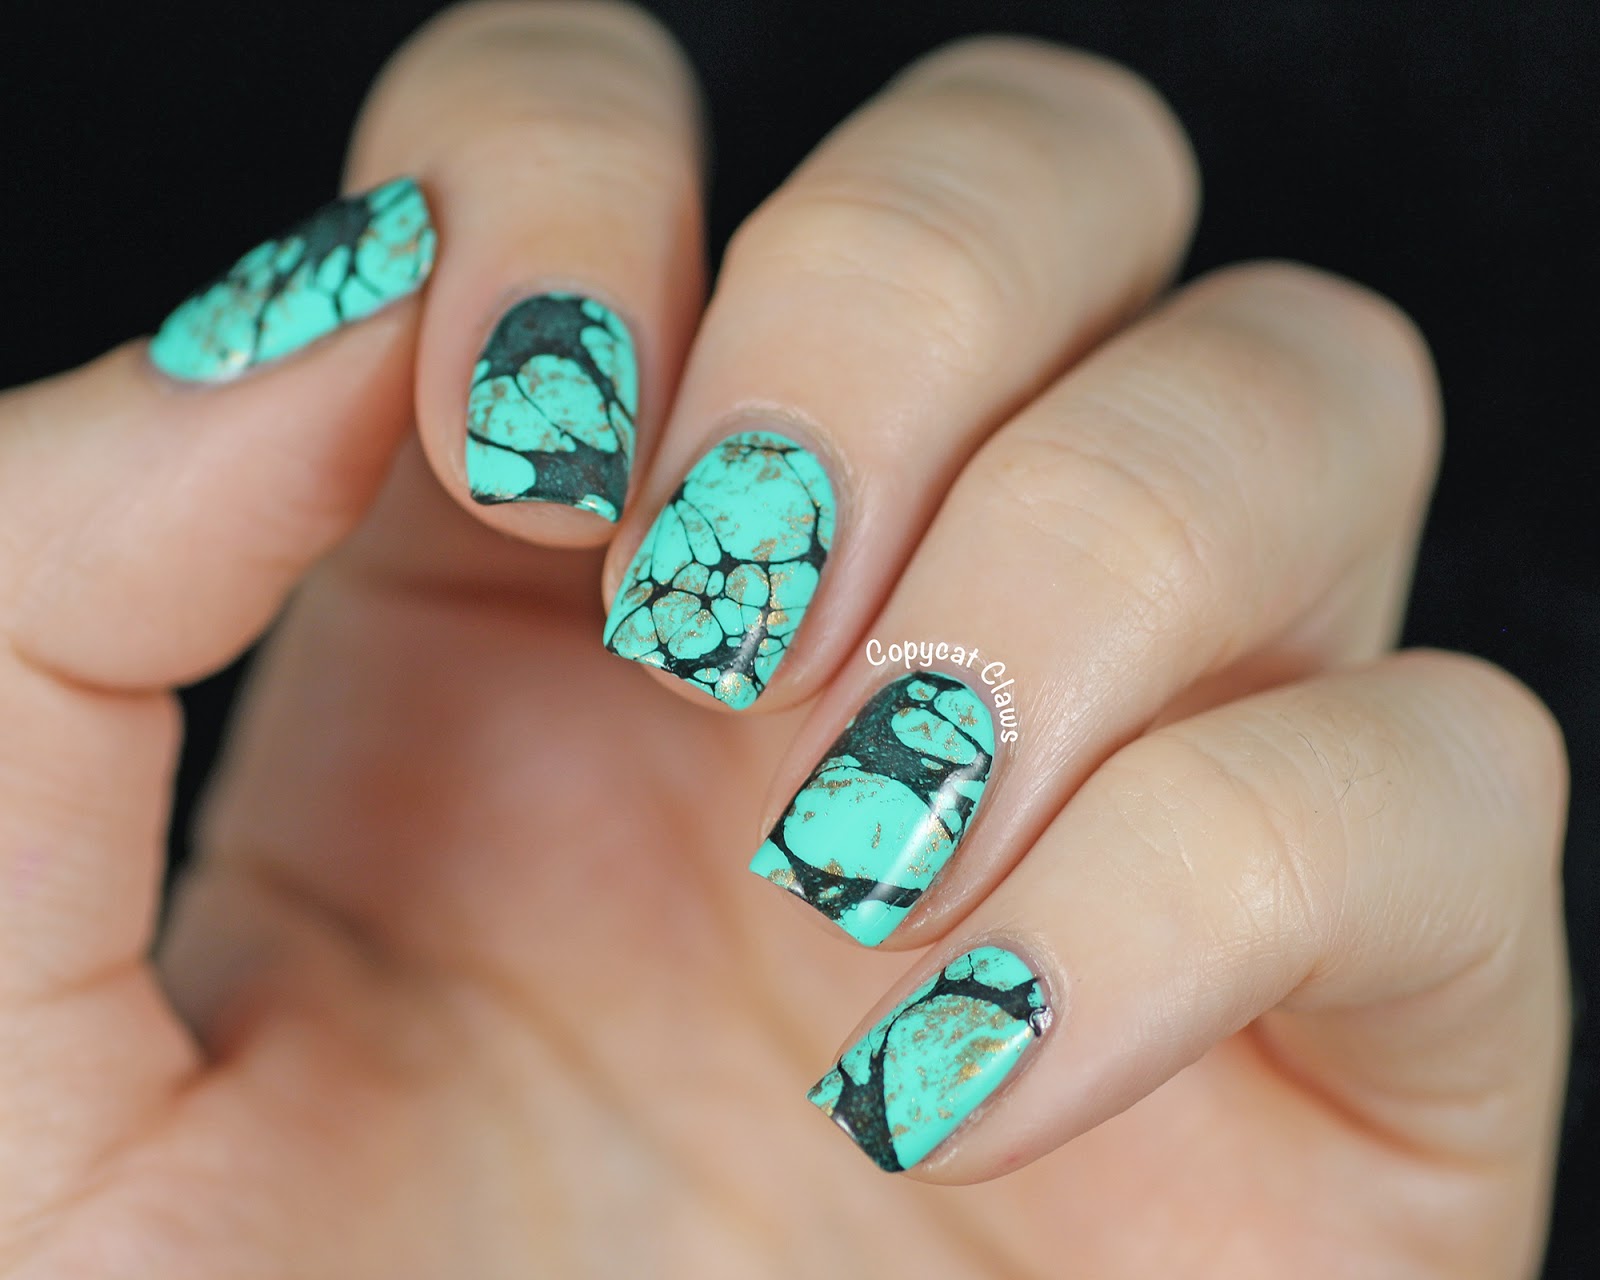 2. 50+ Turquoise Nail Art Designs for a Bold and Beautiful Look - wide 8